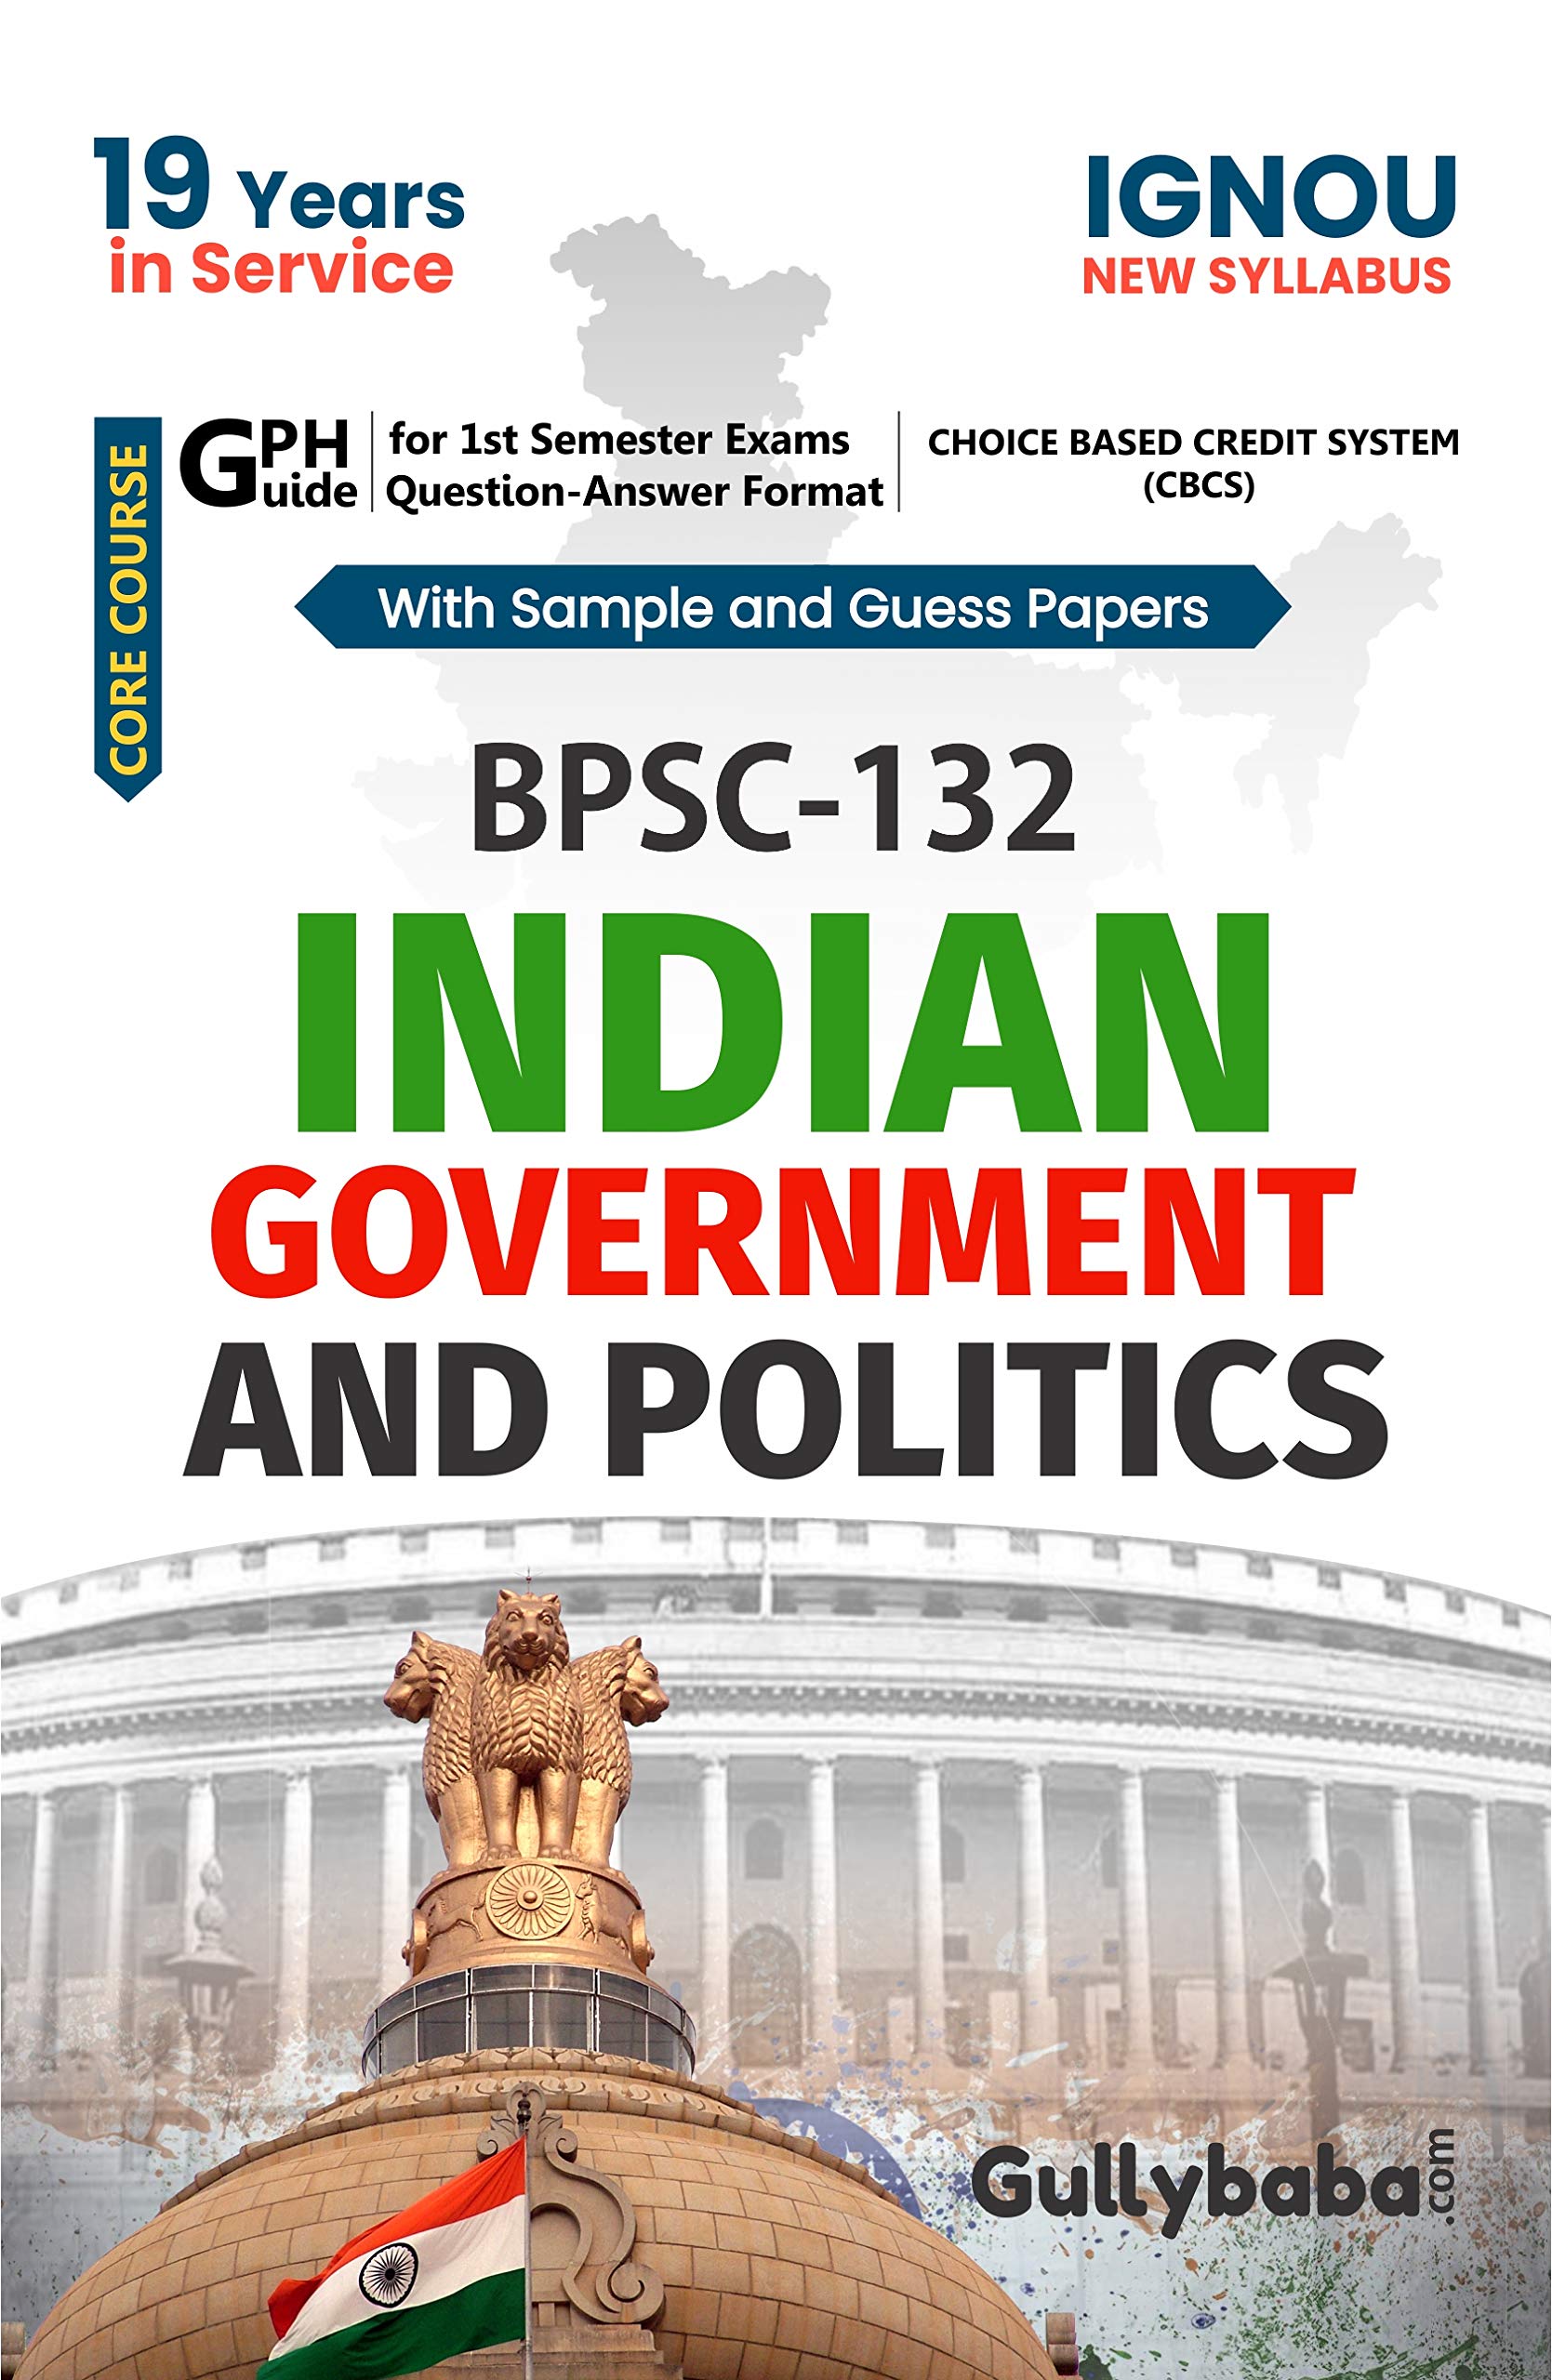 LATEST Gullybaba IGNOU CBCS BAG BPSC-132 Indian Government and Politics in English Medium